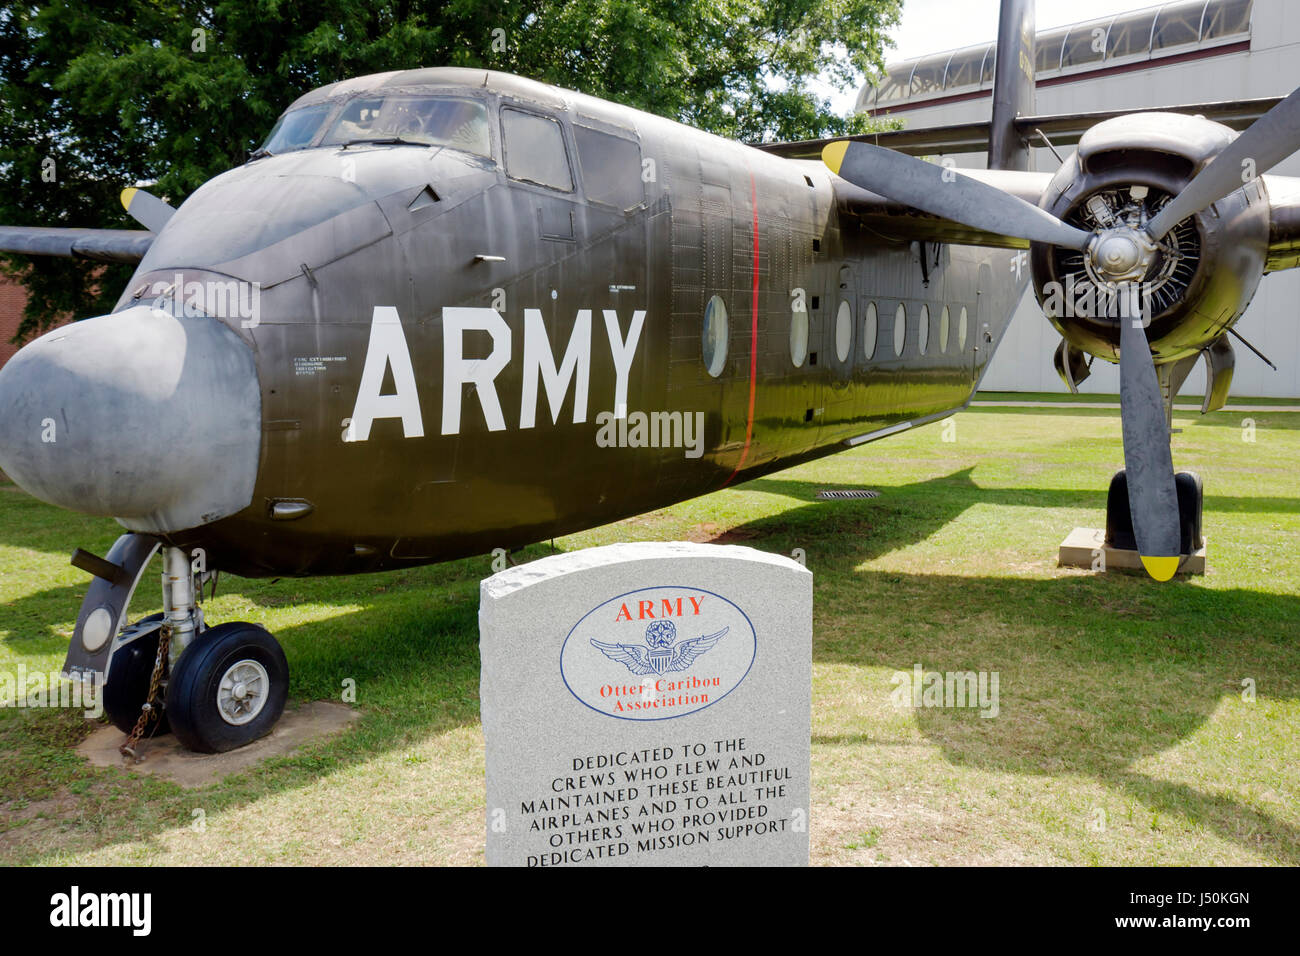 Alabama,Dale County,Ft. Fort Rucker,United States Army Aviation Museum,aircraft,military,exhibit exhibition collection defense,combat,Otter Caribou,co Stock Photo